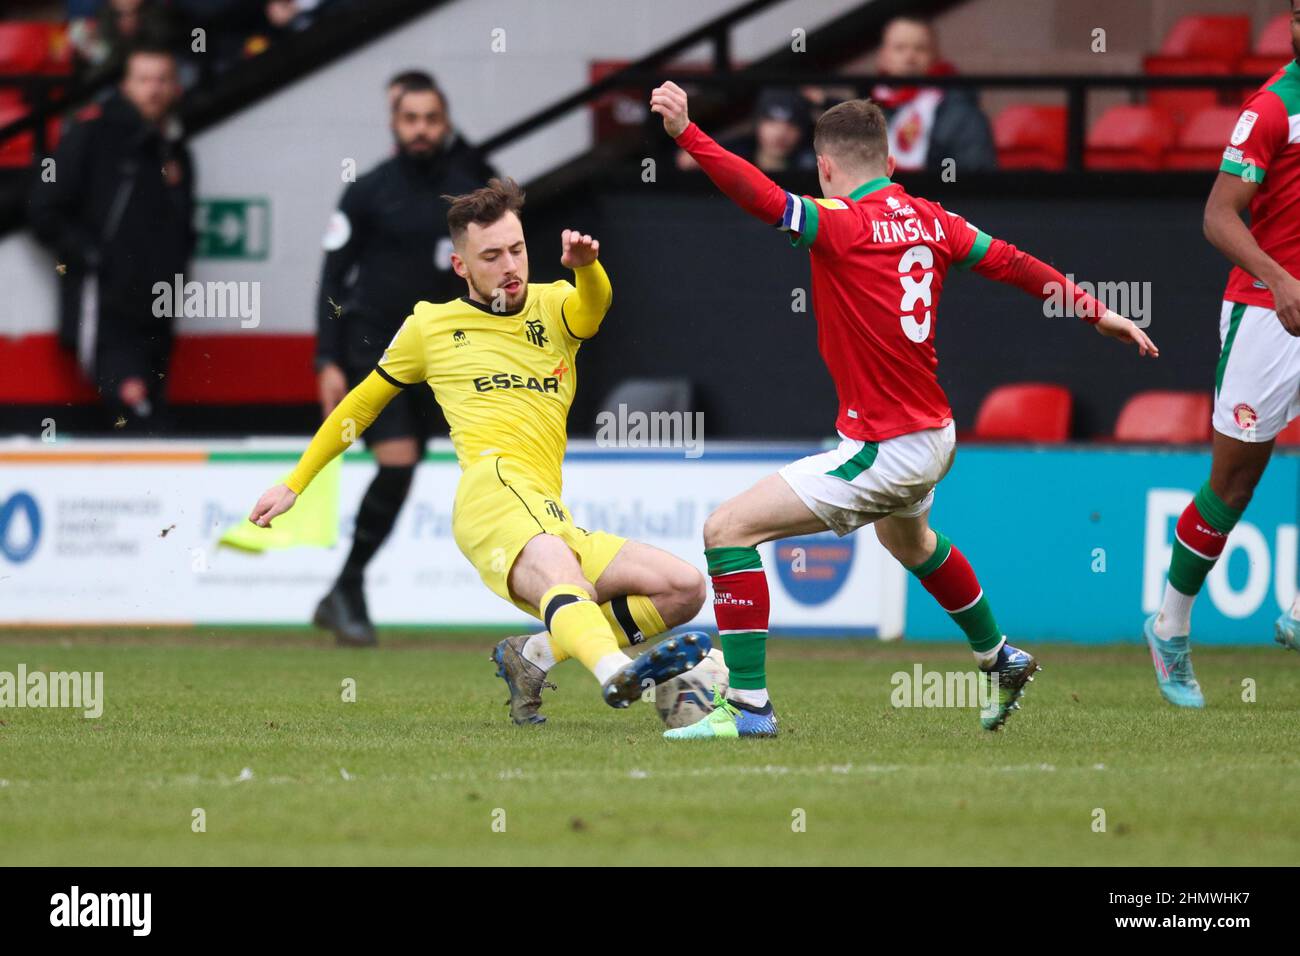 Walsall, UK. 12th Feb, 2022. X during the Sky Bet League Two match between Walsall and Tranmere Rovers at Bescot Stadium on February 12th 2022 in Walsall, England. (Photo by Richard Ault/phcimages.com) Credit: PHC Images/Alamy Live News Stock Photo